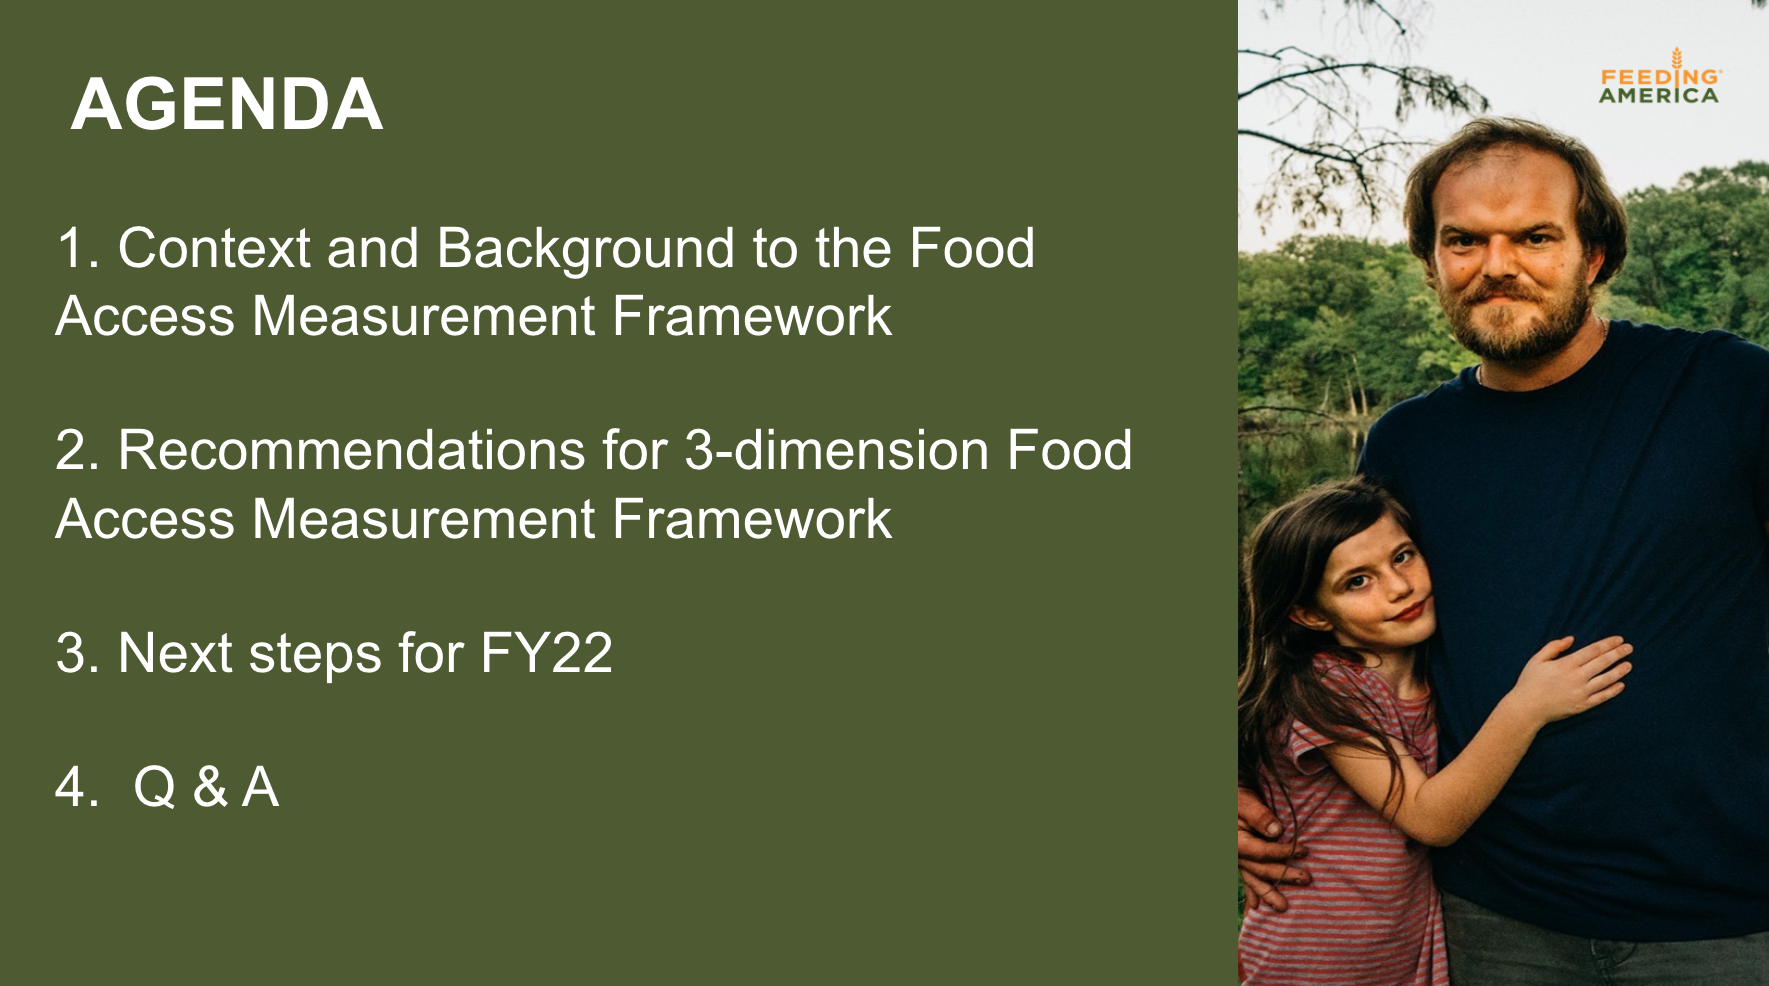 Research & Data: Updates on the Food Access Measurement Framework